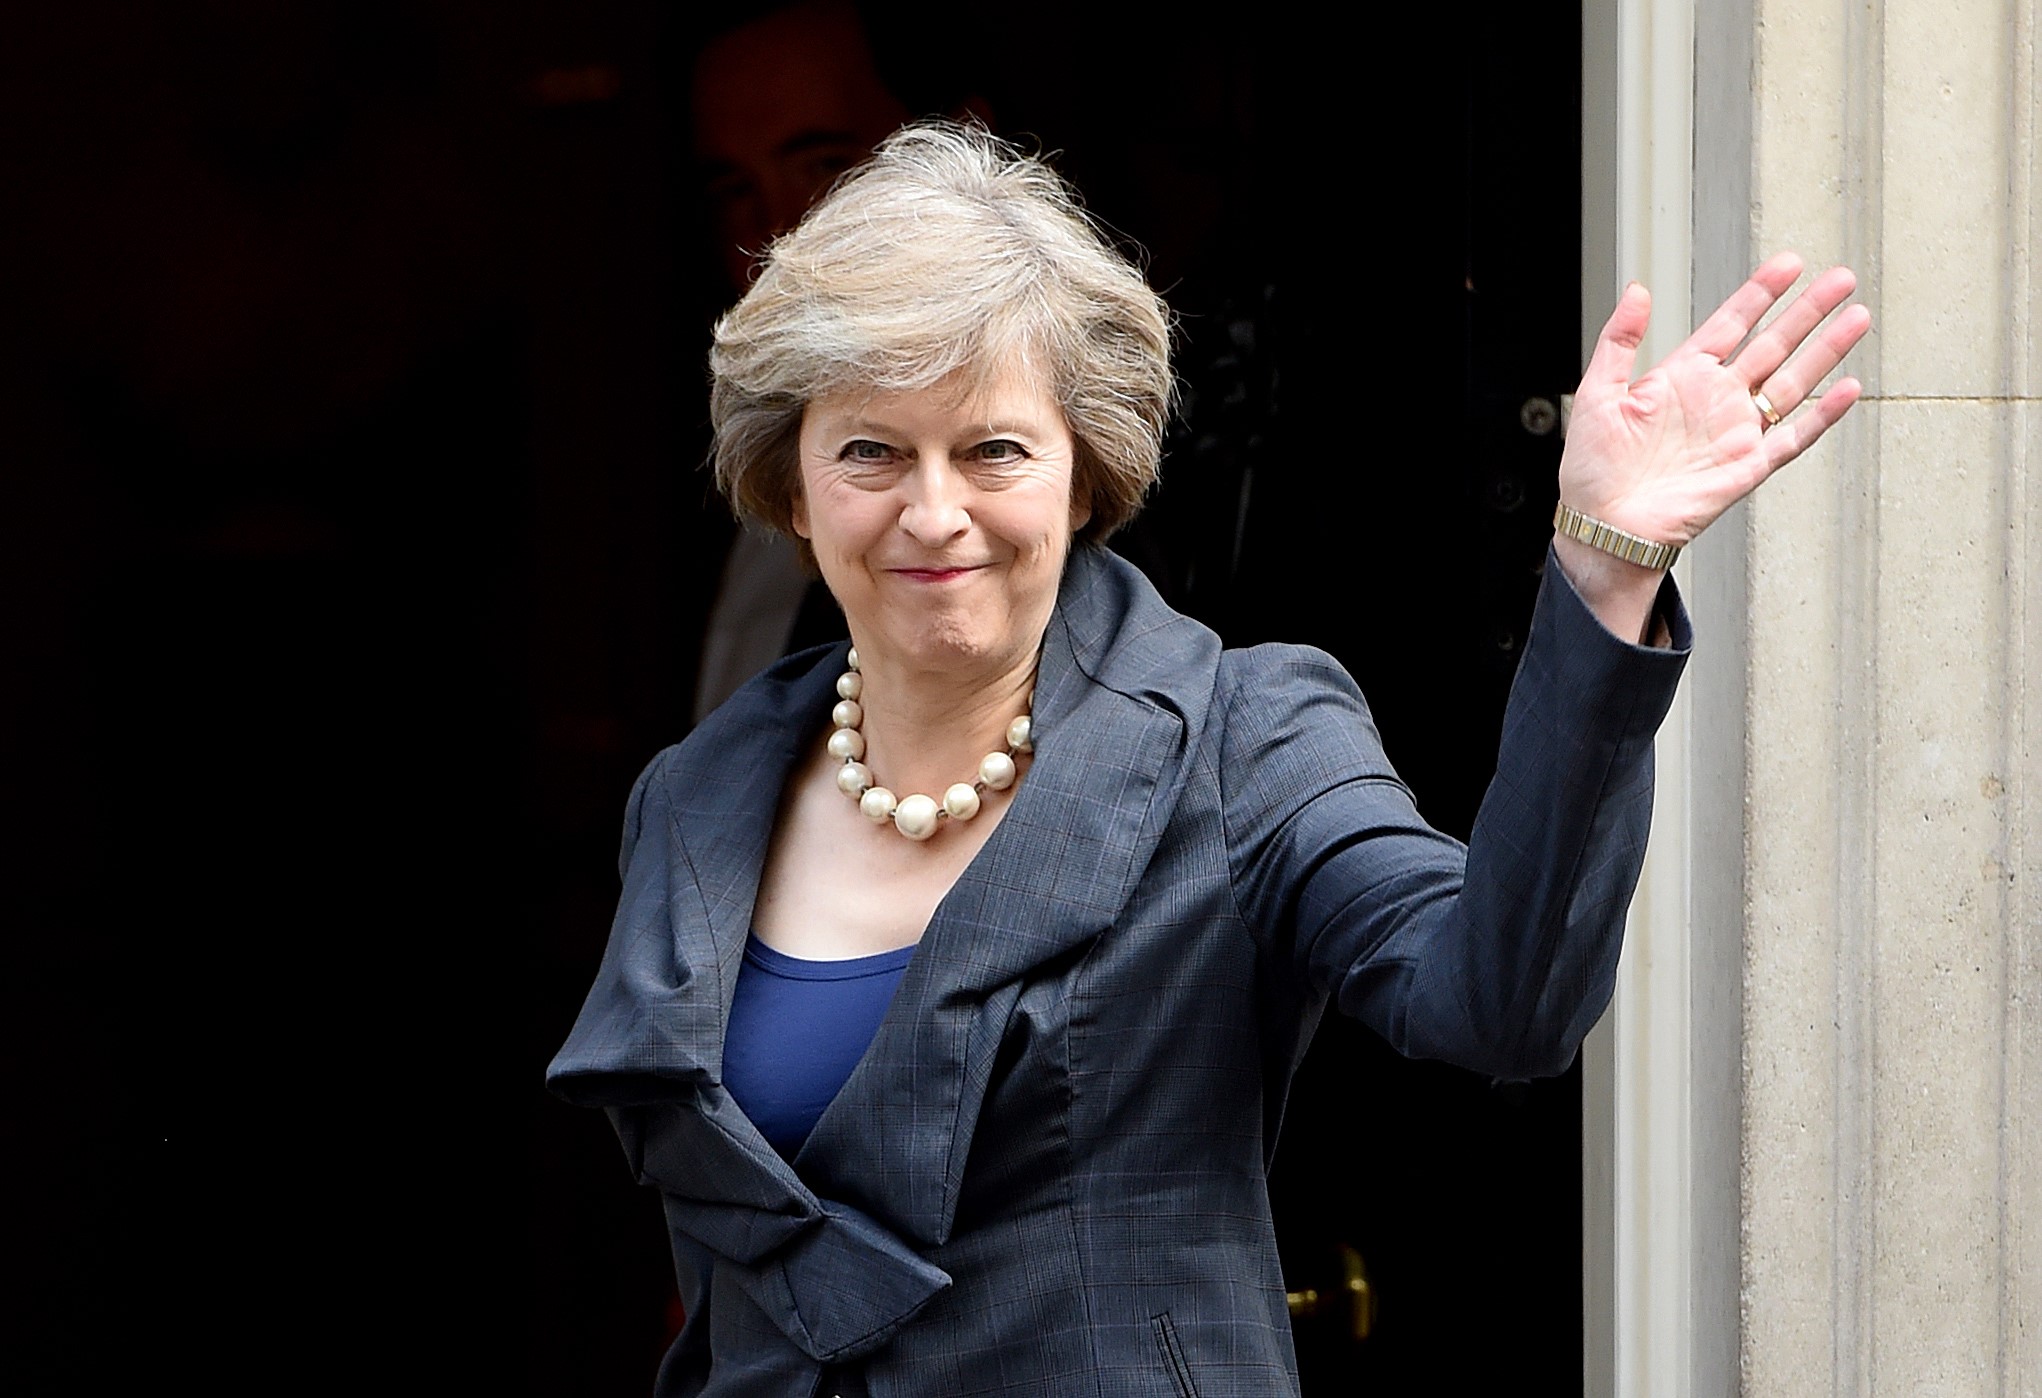 Theresa May arrives for David Cameron's final cabinet meeting before she takes over and appoints a new office, in London, on July 12, 2016. (Kate Green—Anadolu Agency/Getty Images)